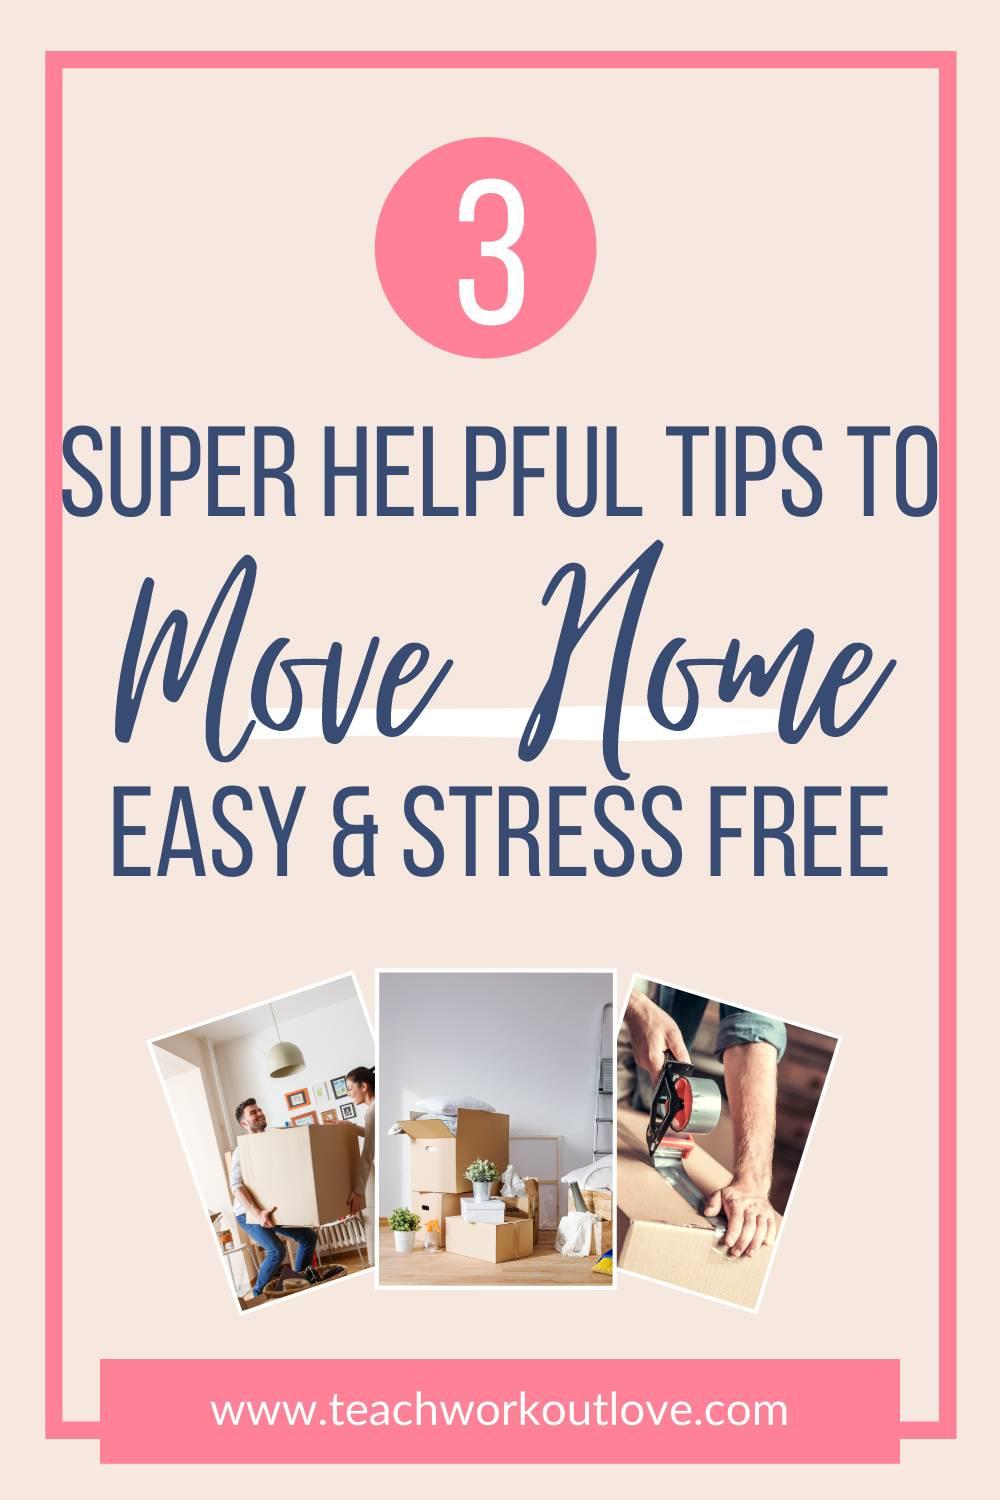 When you’re moving houses, you are sure to feel stress. Moving home can be stressful and emotional but not complicated. Here's how.